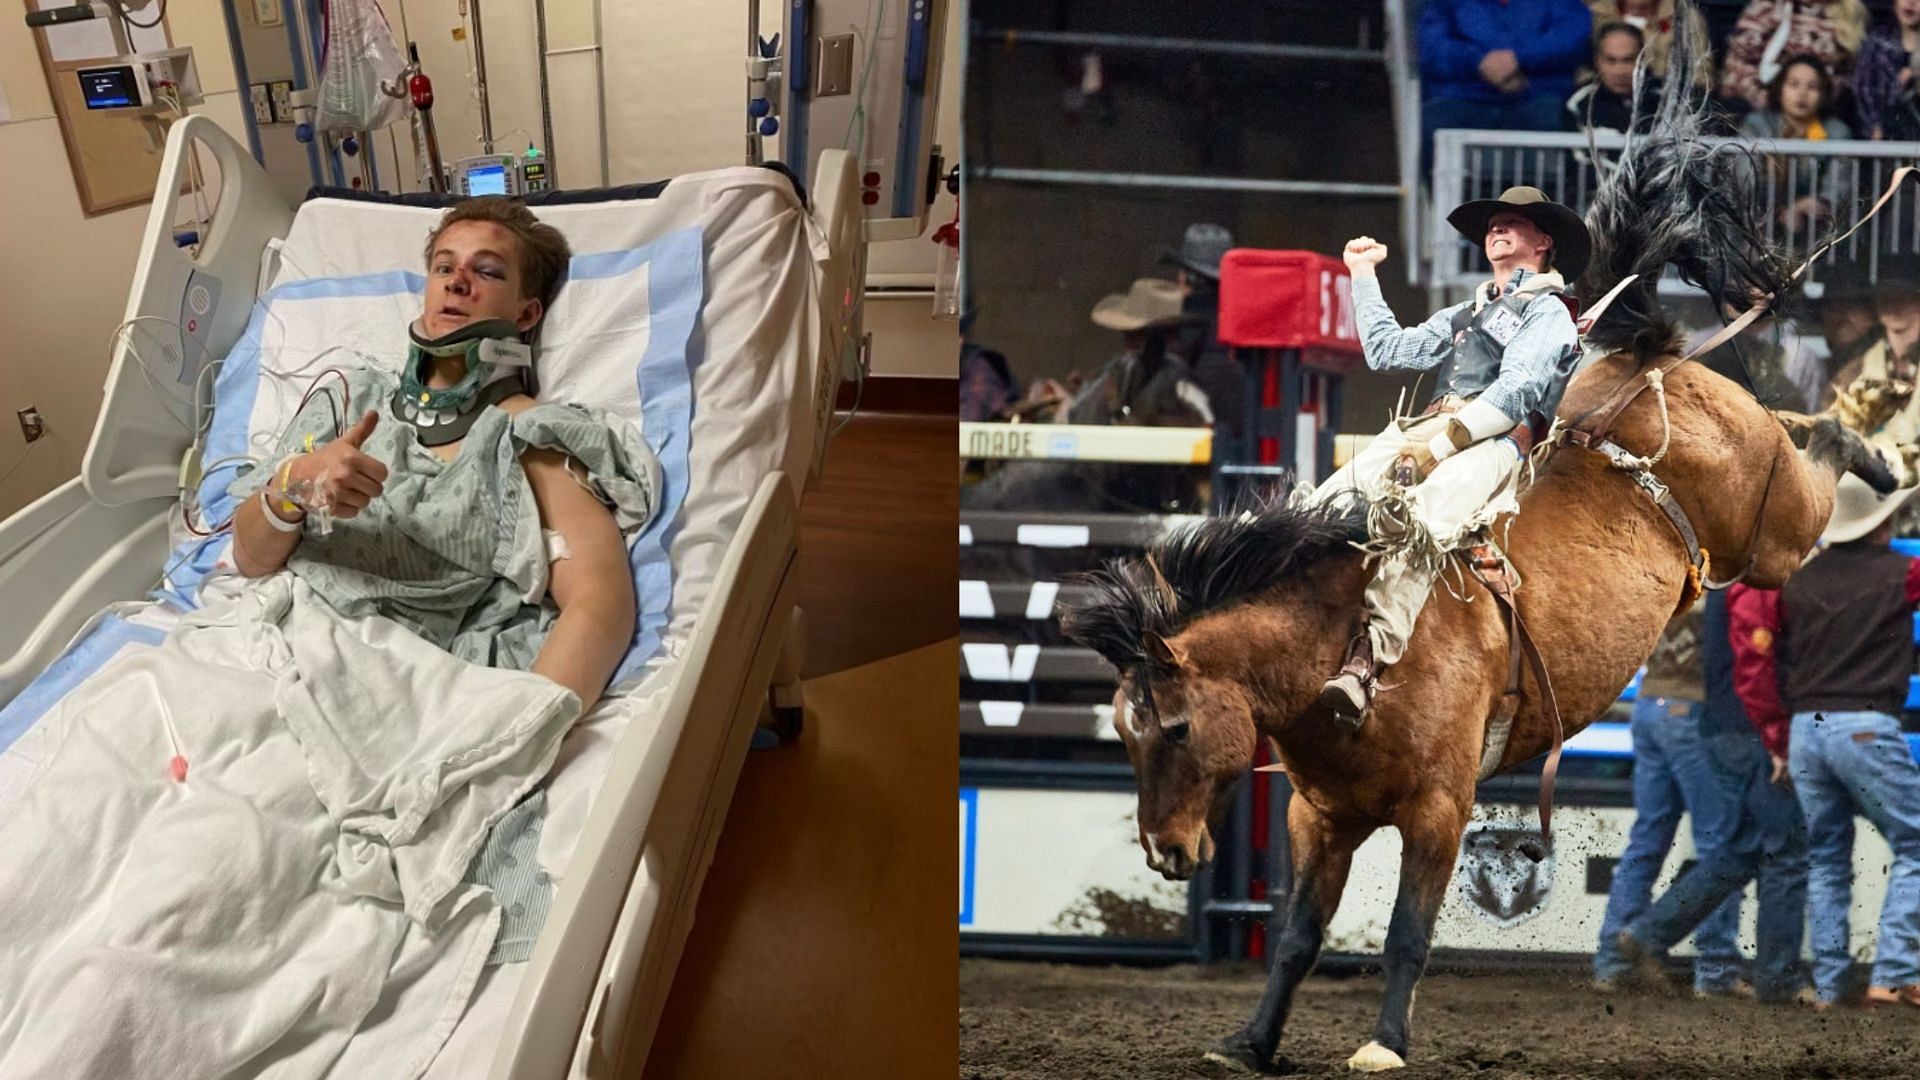 What happened to Austin Broderson?  A case where a bareback bronze rider suffered horrific injuries was explored in a video related to the incident